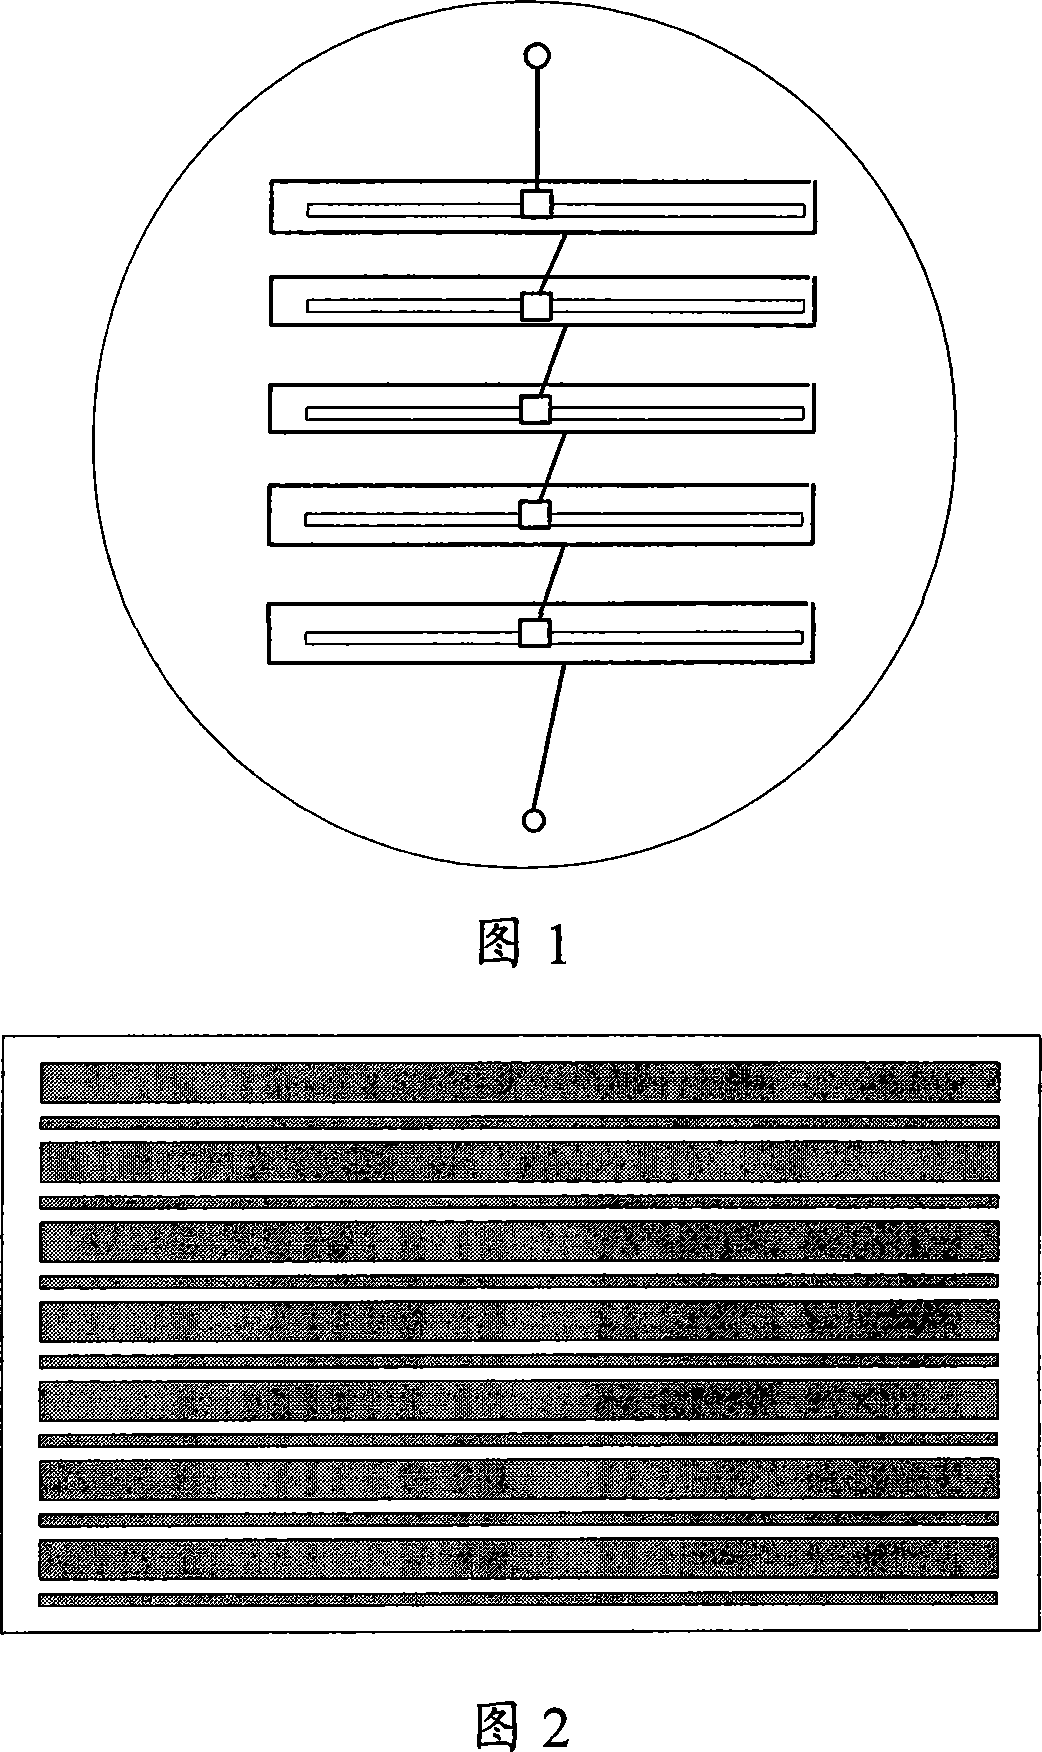 A solar panel and the corresponding manufacturing method